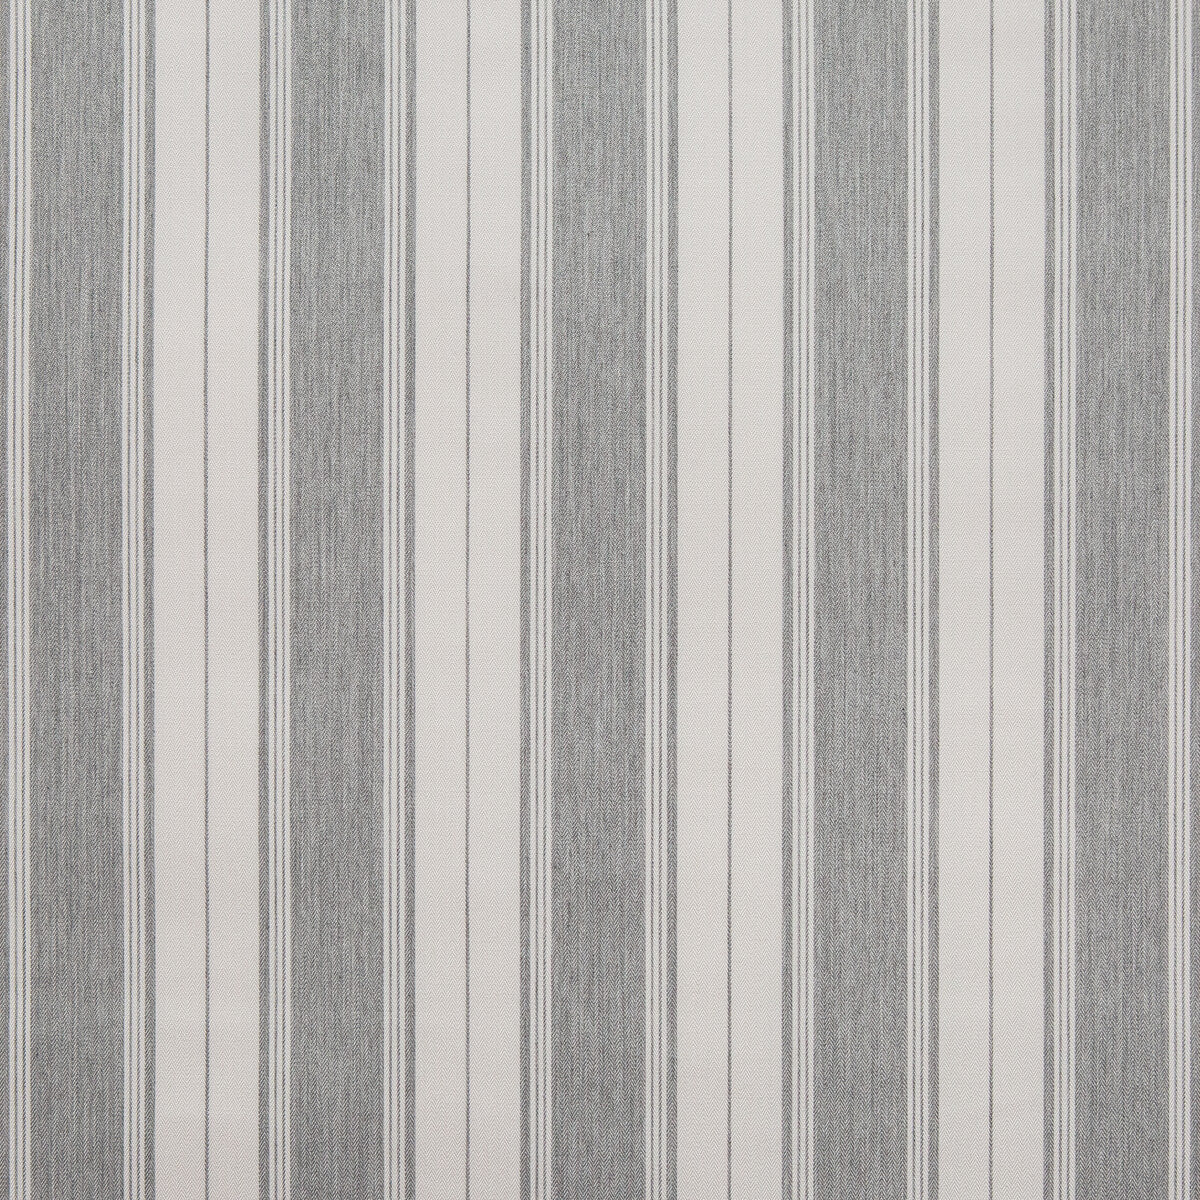 Uma Stripe fabric in pebble color - pattern 35828.11.0 - by Kravet Design in the Indoor / Outdoor collection